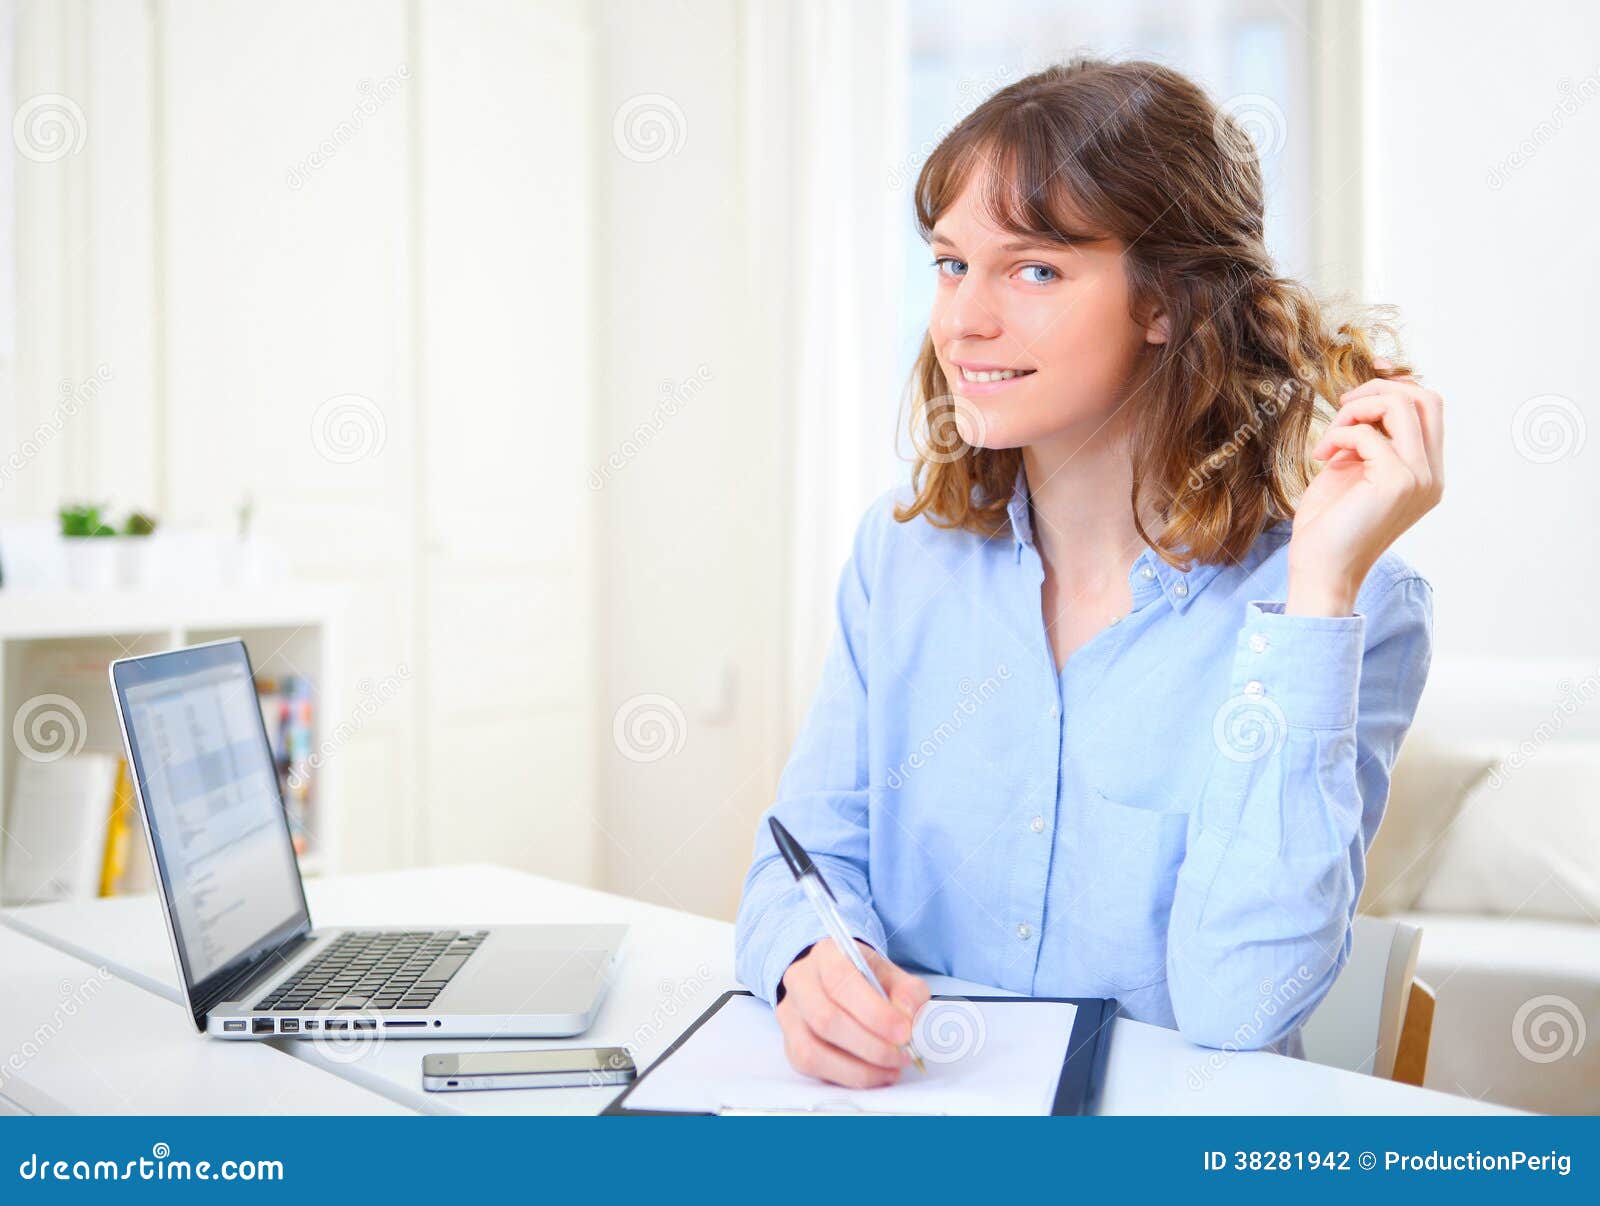 Young Attractive Business Woman Copying Data on Paper Stock Photo ...